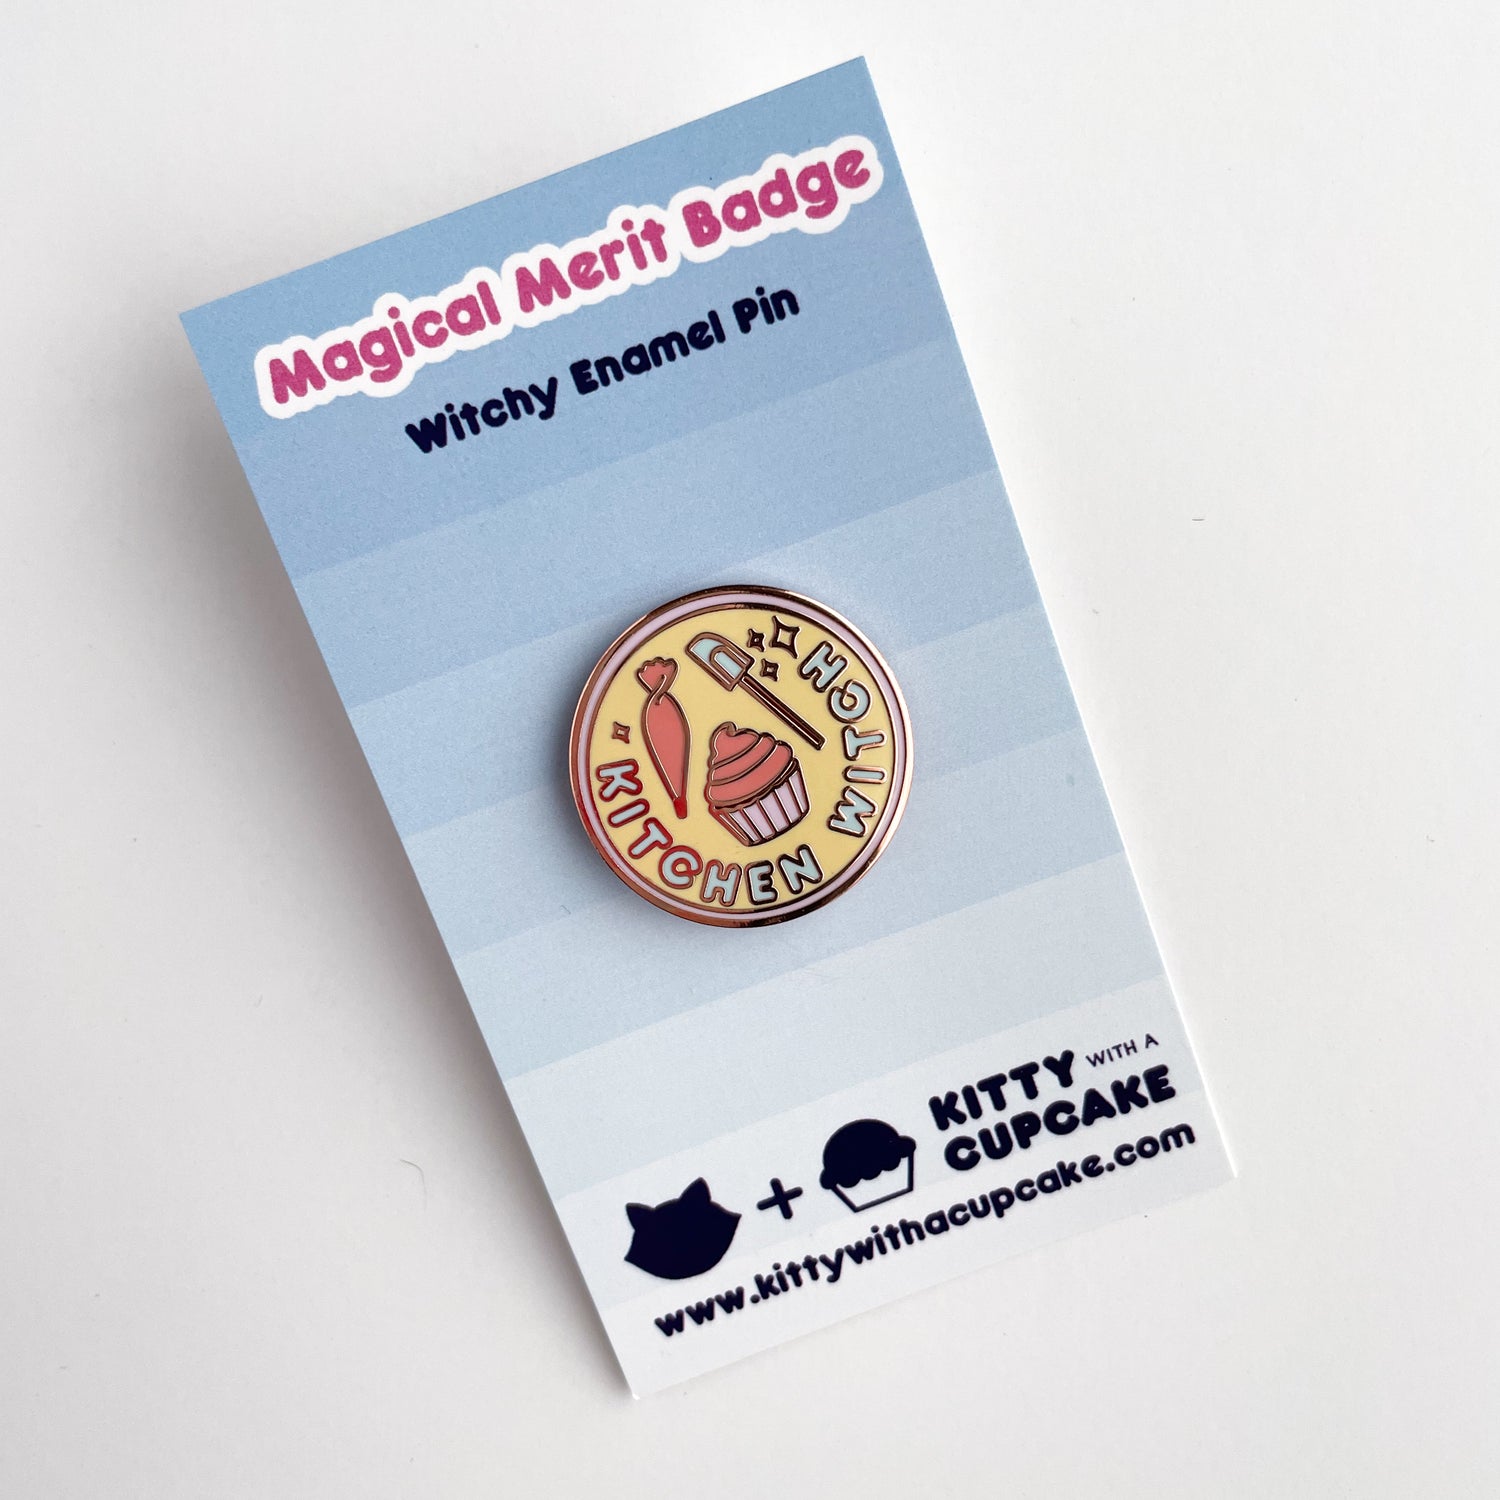 A circular Kitchen Witch pin on a card with blue to white gradient background that reads "Magical Merit Badge" and "Witchy Enamel Pin" across the top.